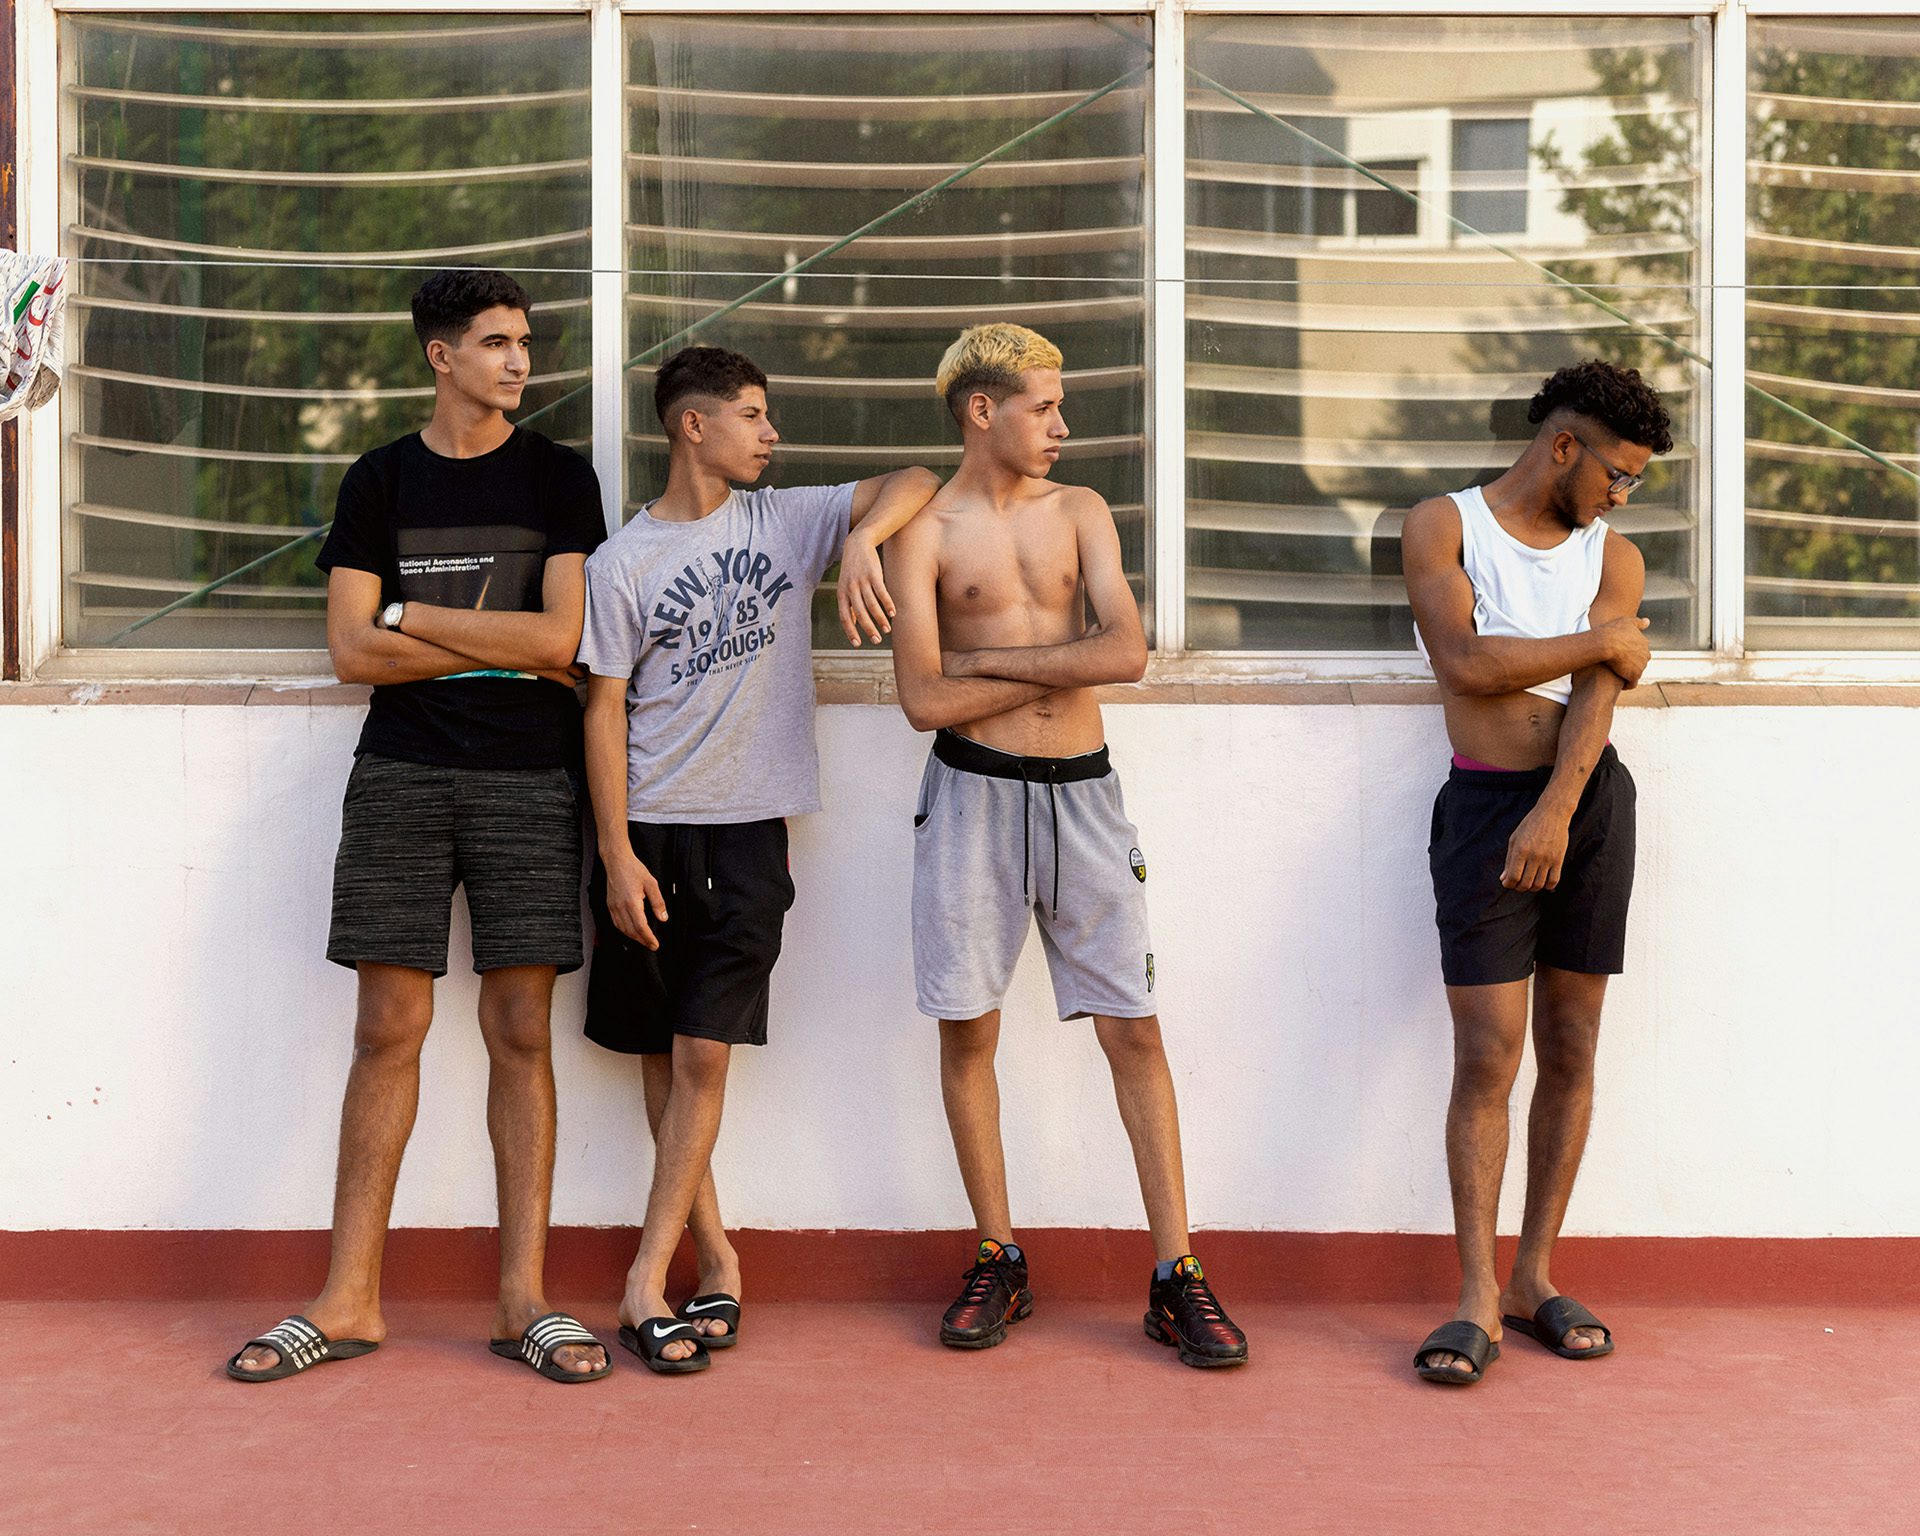 Photograph taken from Dialect by Felipe Romero Beltran of four young people stood outside in front of windows, in an area with a red floor. The three people on the left are stood close to one another, while the fourth on the right, wearing a white crop top and dark shorts, is stood apart